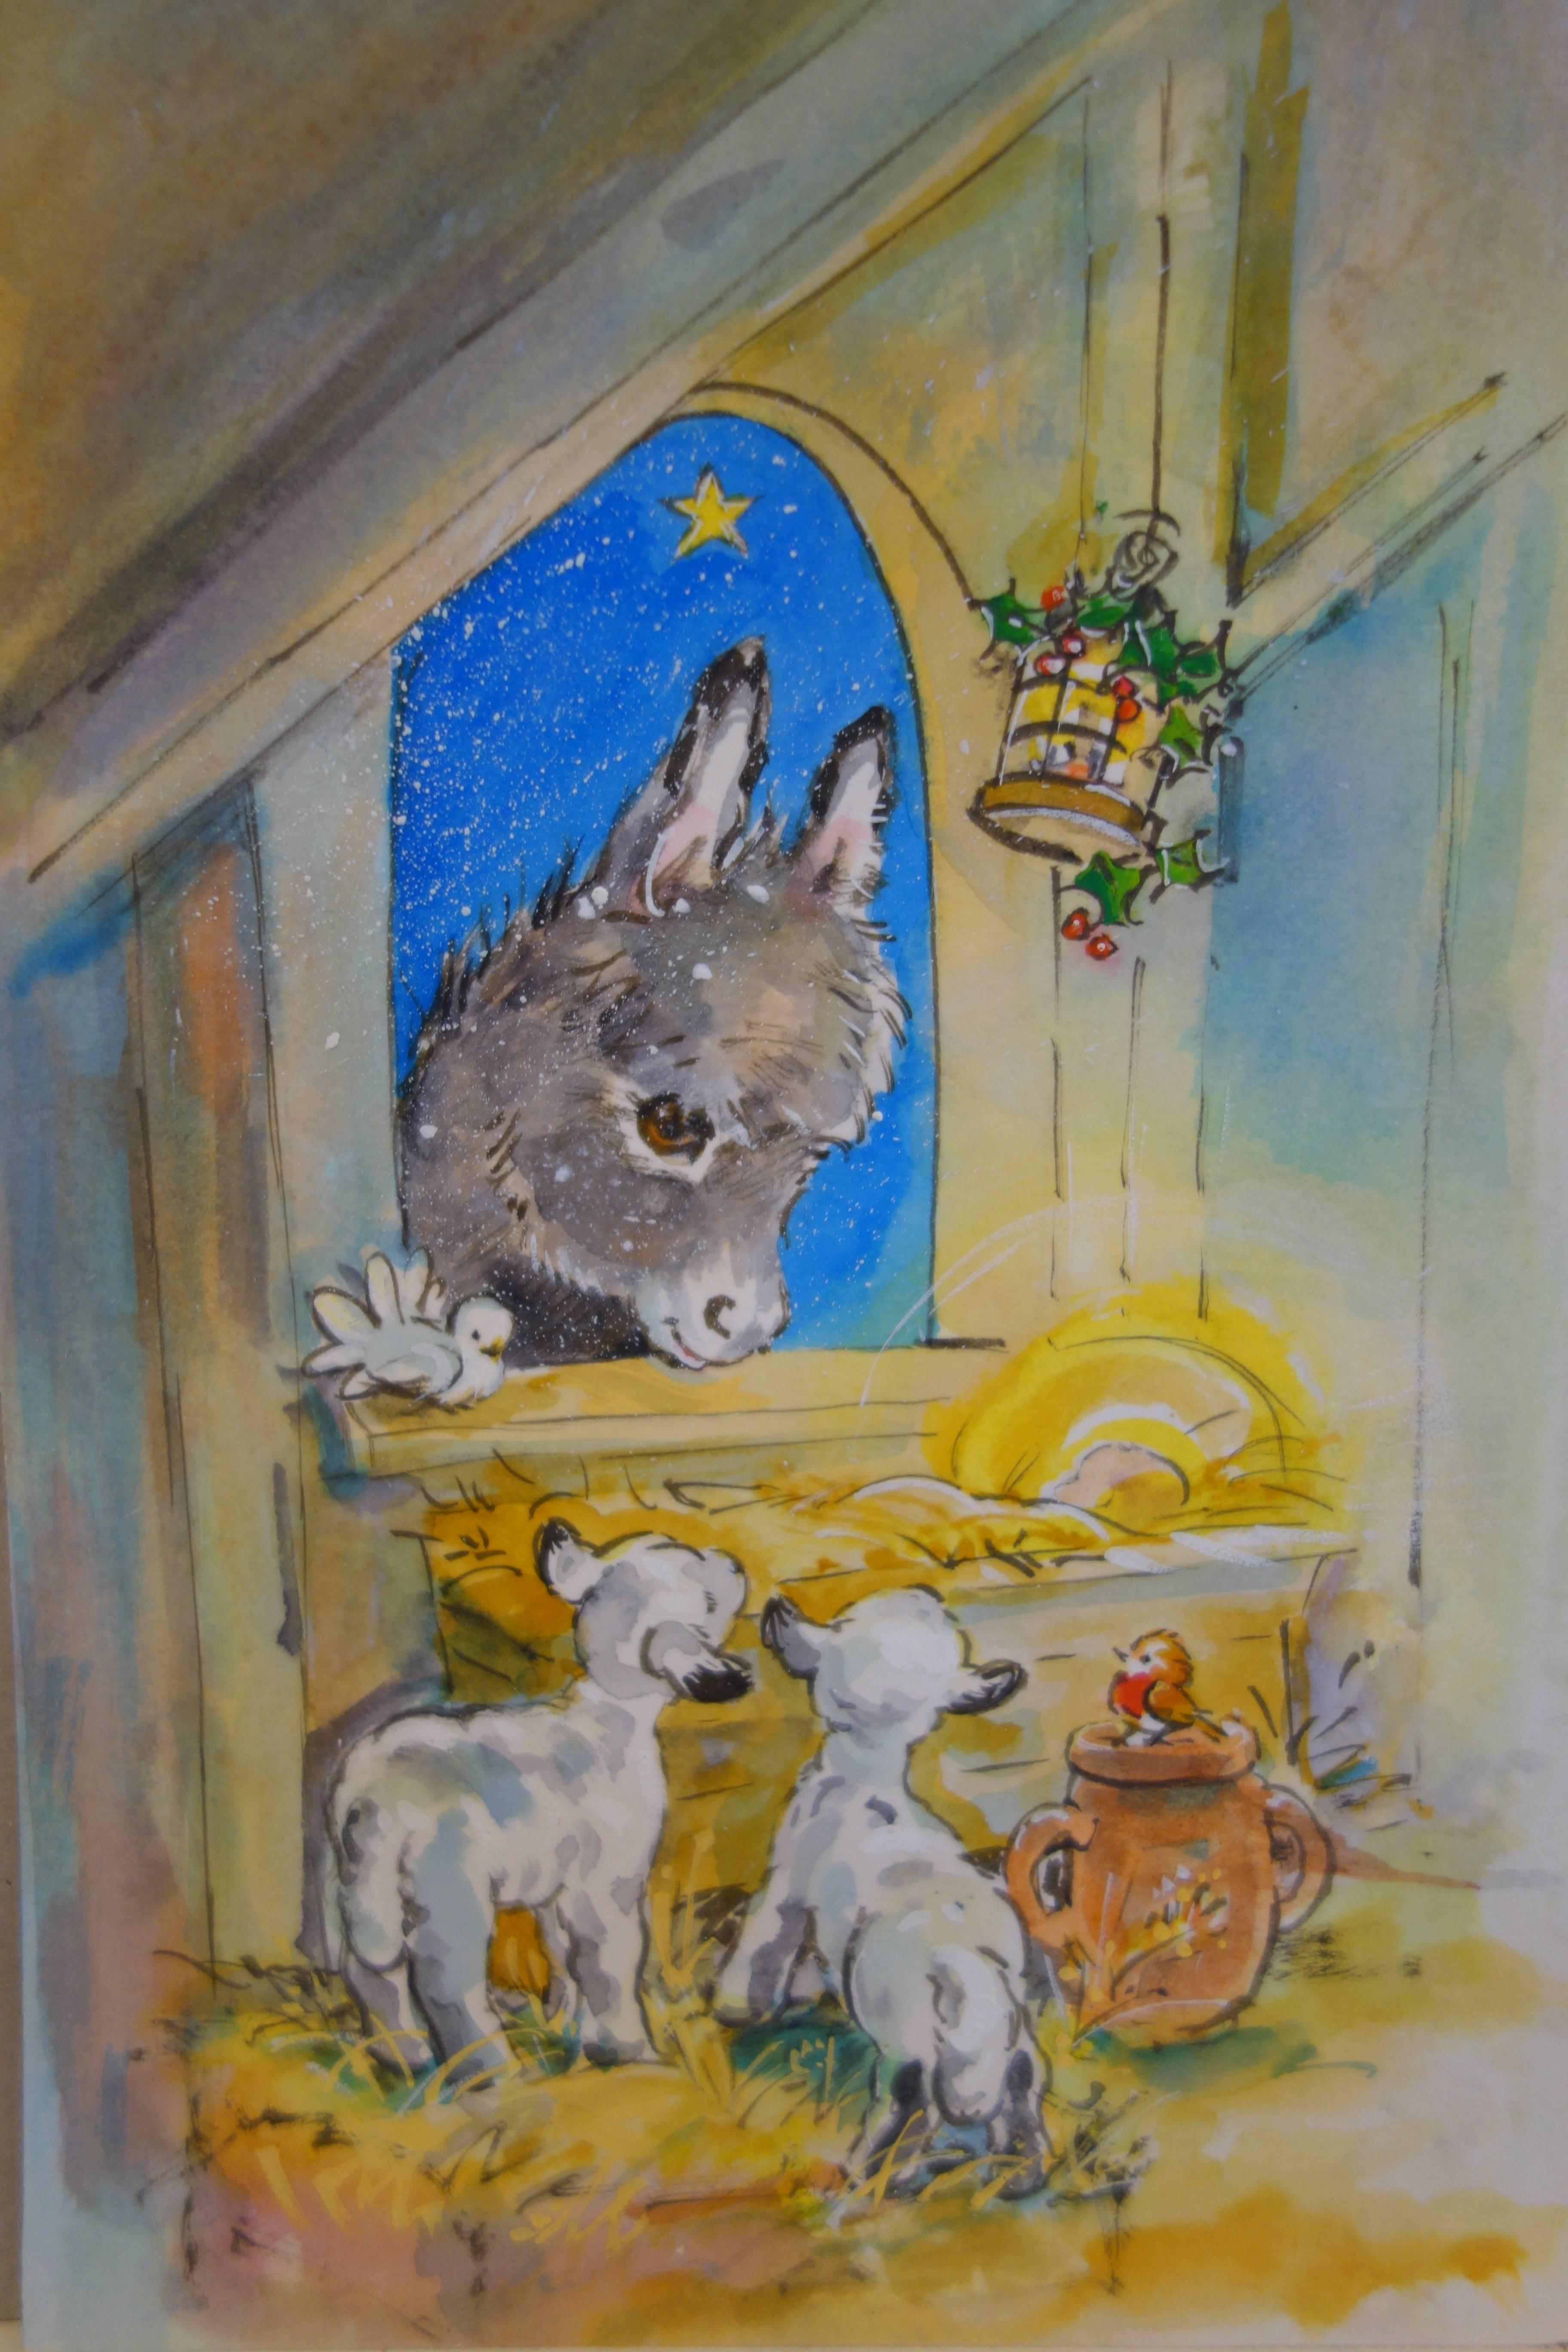 Christmas night with Donkeys, a Robin and Lambs in a stable by a crib